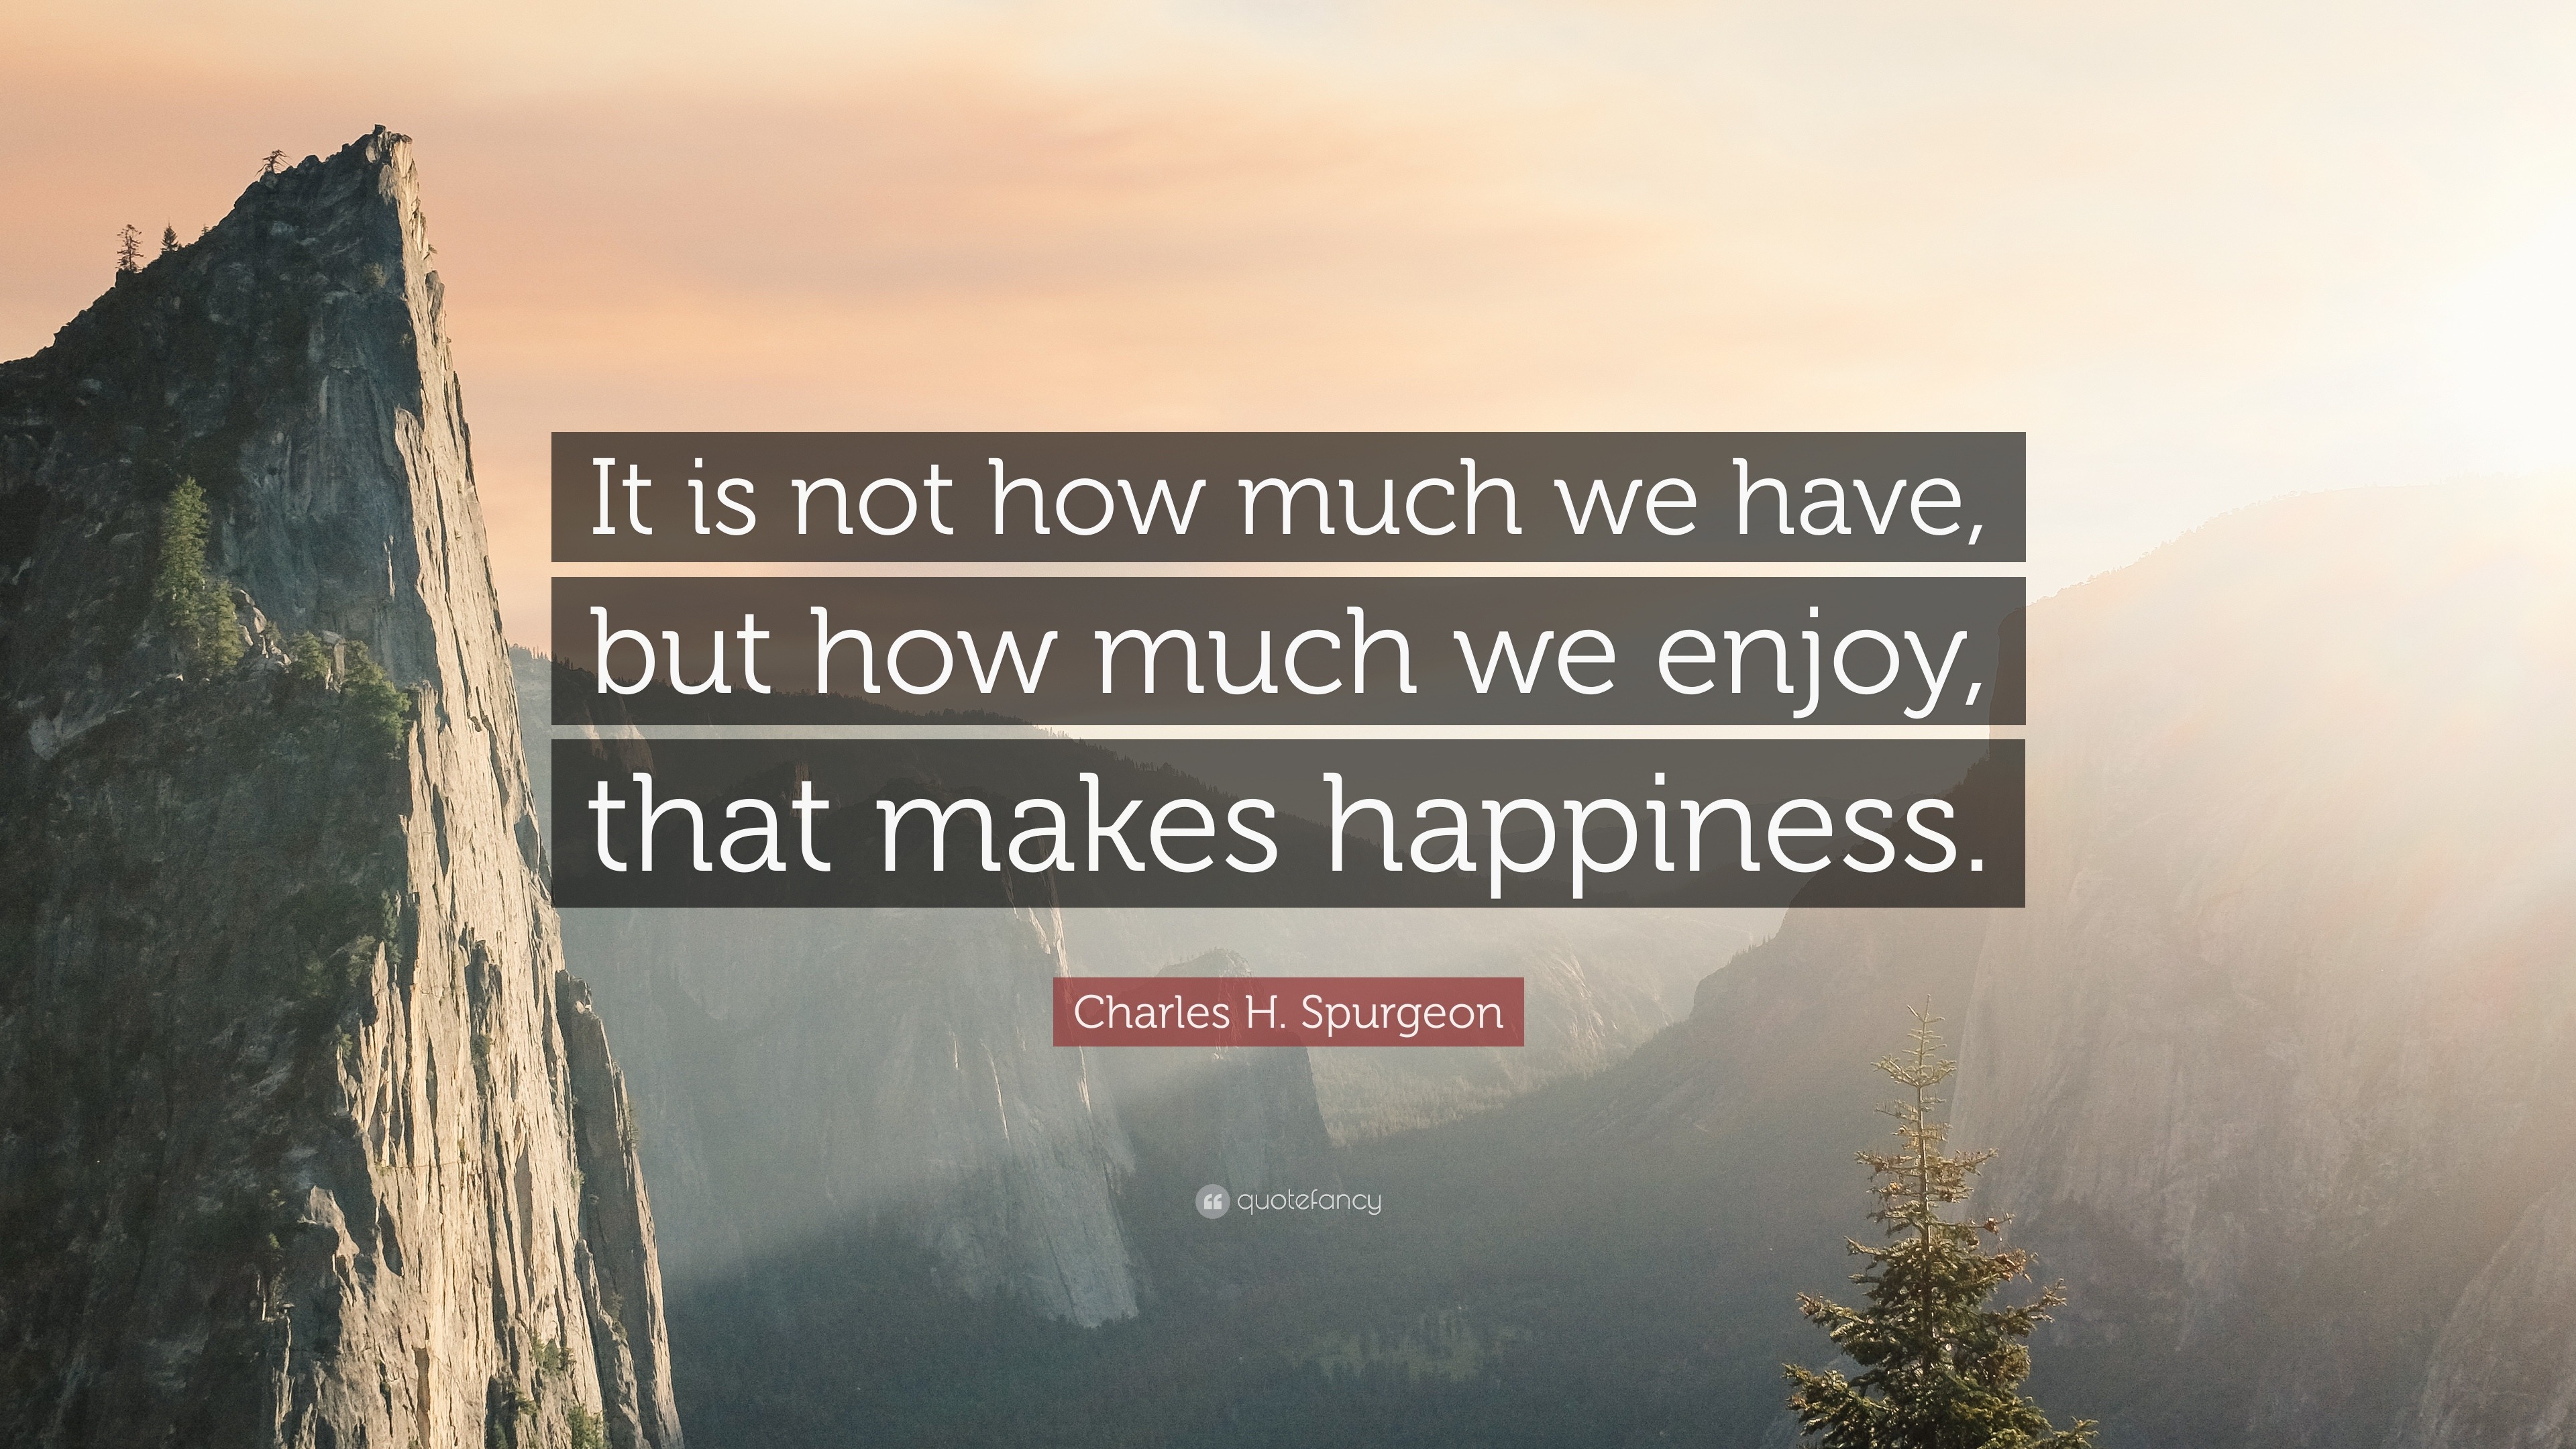 Charles H. Spurgeon Quote: “It is not how much we have, but how much we ...